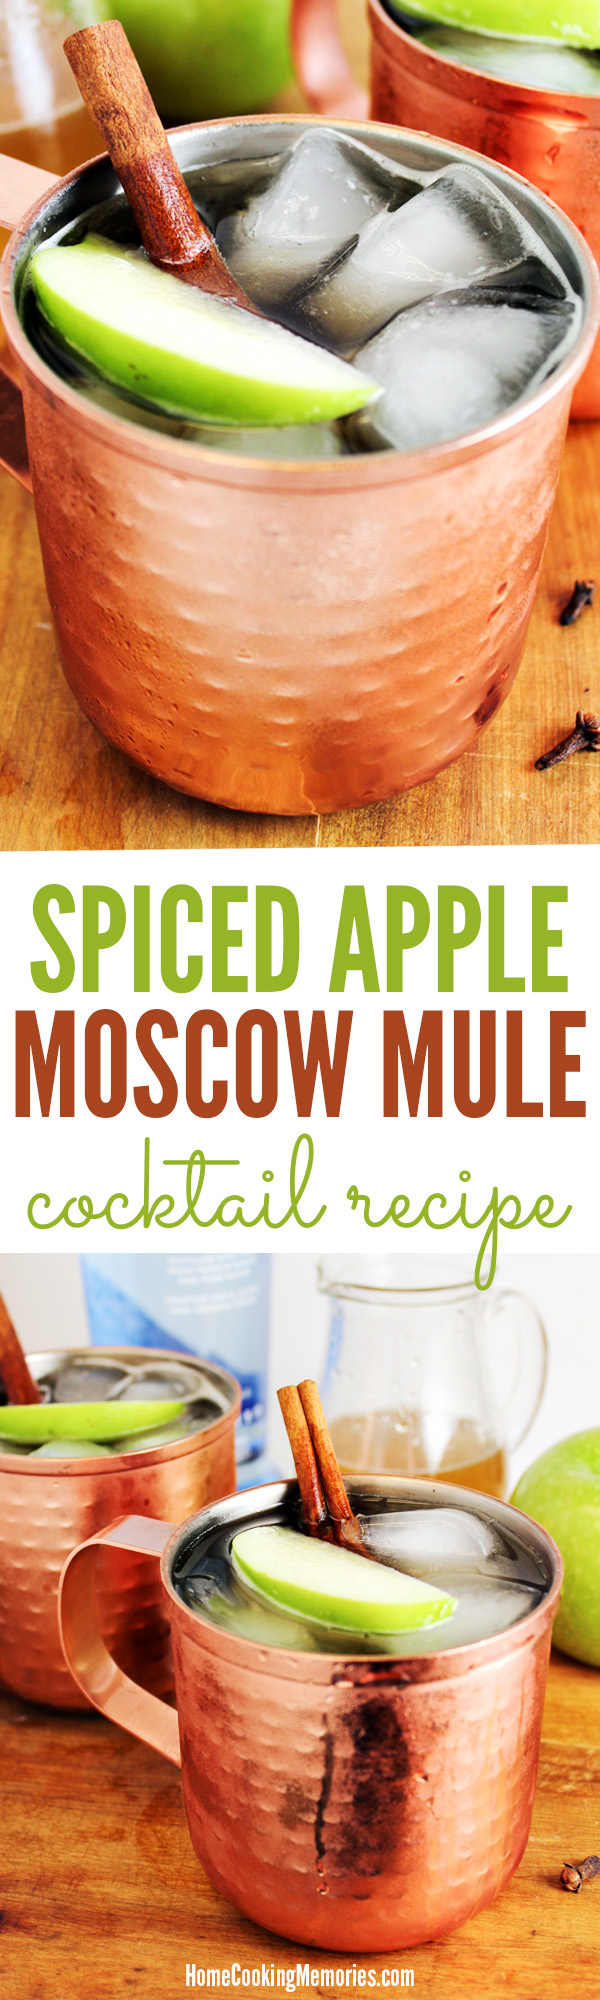 SO GOOD! This Spiced Apple Moscow Mule cocktail recipe is made with apple cider and a spiced simple syrup (with cinnamon & cloves), plus vodka & ginger beer. Especially great when served in a copper mug.